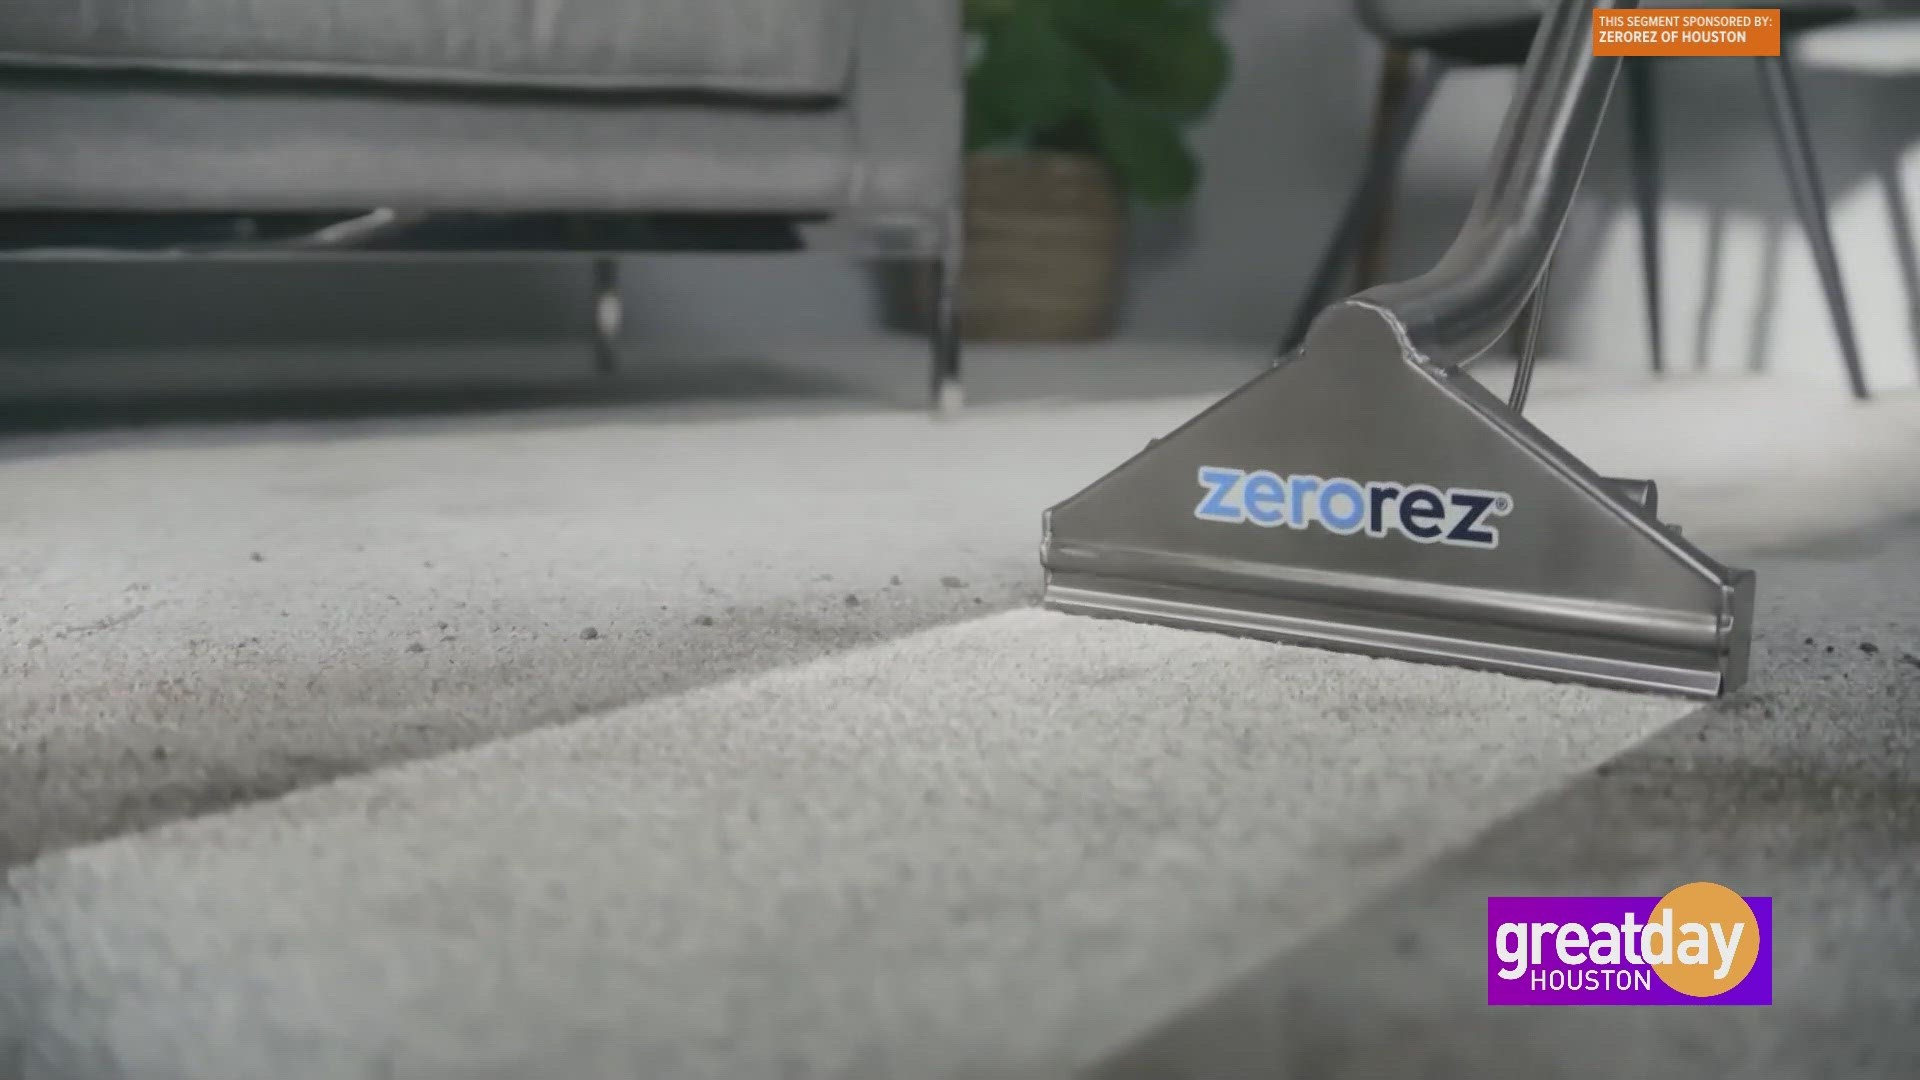 Kyle Peterson, General Manager of Zerorez of Houston, shows how Zerorez can clean your floors without toxic chemicals or detergents, leaving carpets residue free.